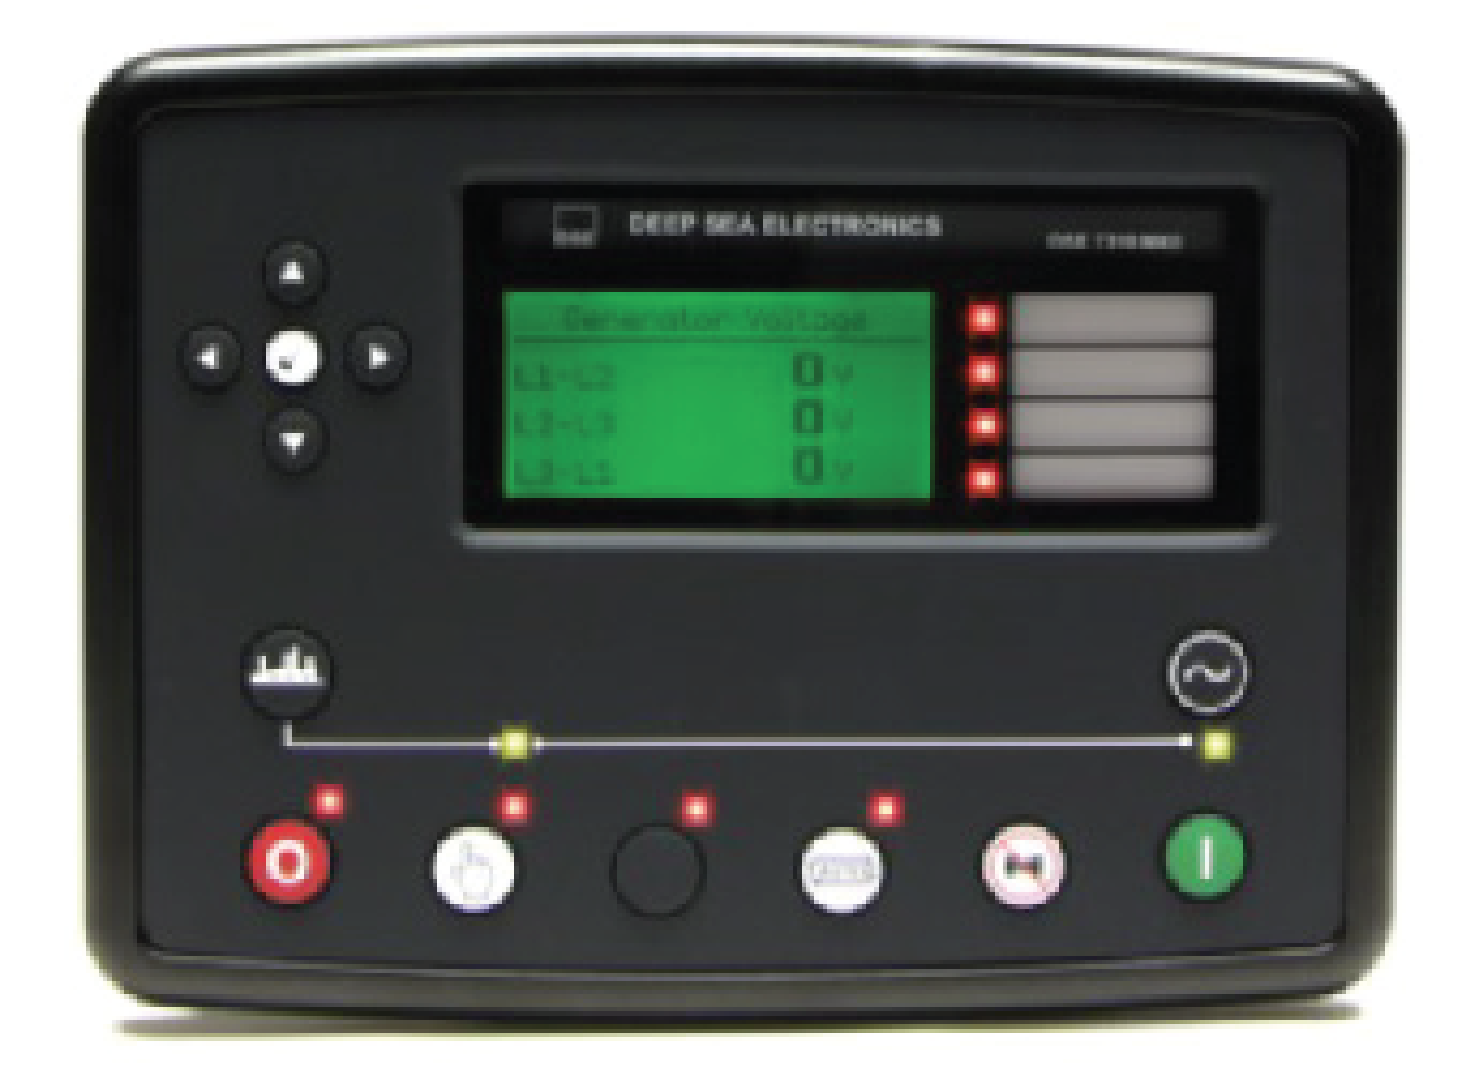 The deep sea manual is separate from the operations and maintenance manual. The deep sea manual can be found under the name, "DSE7410 MKII & DSE7420 MKII". This will include all specifications, installation, operations, controls, and more.